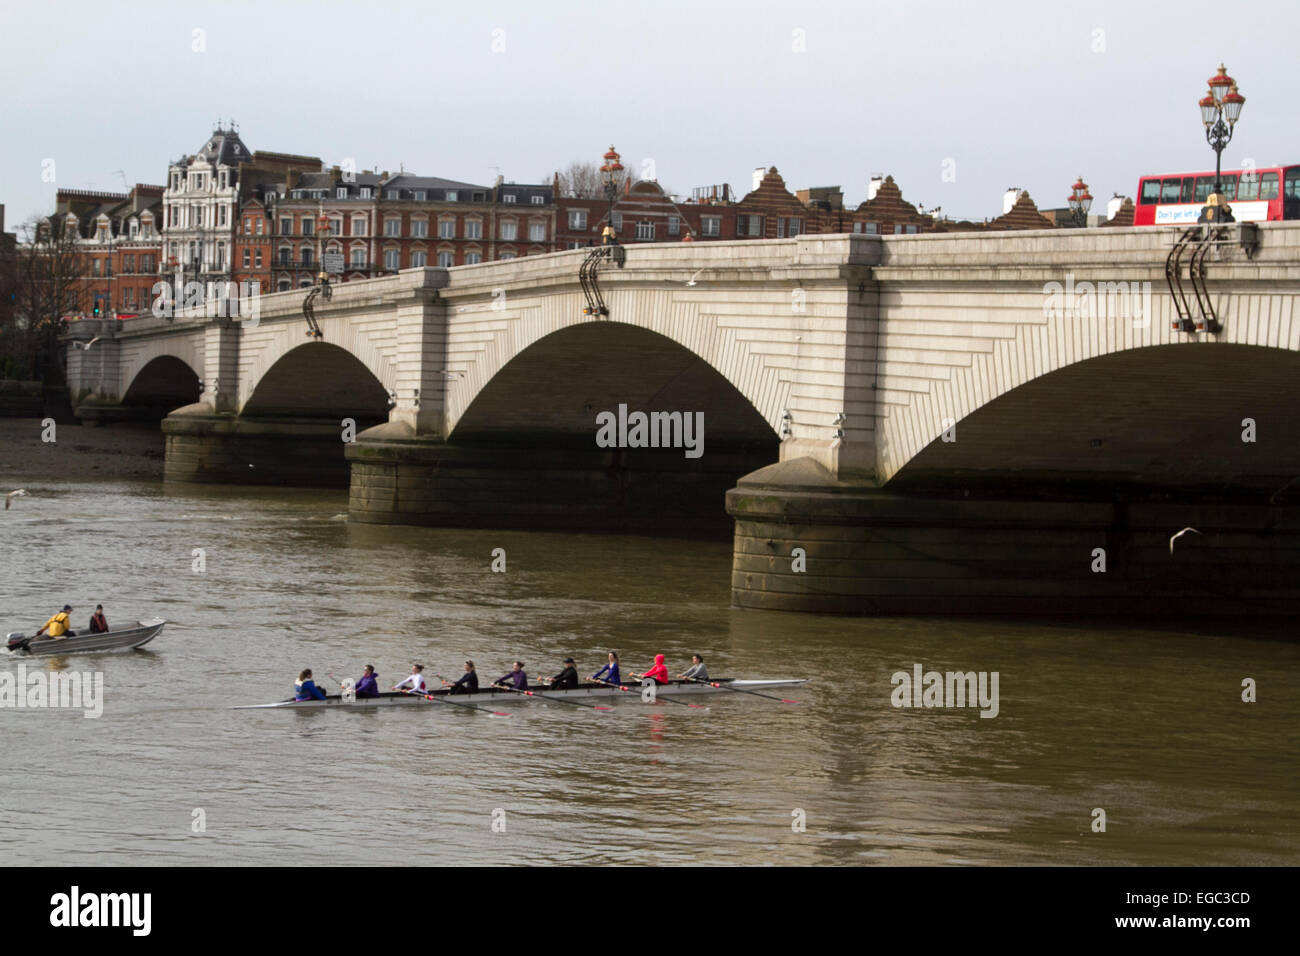 Putney, London, UK. 22nd February, 2015. Rowers from different clubs practice on the River Thames in Putney Credit:  amer ghazzal/Alamy Live News Stock Photo